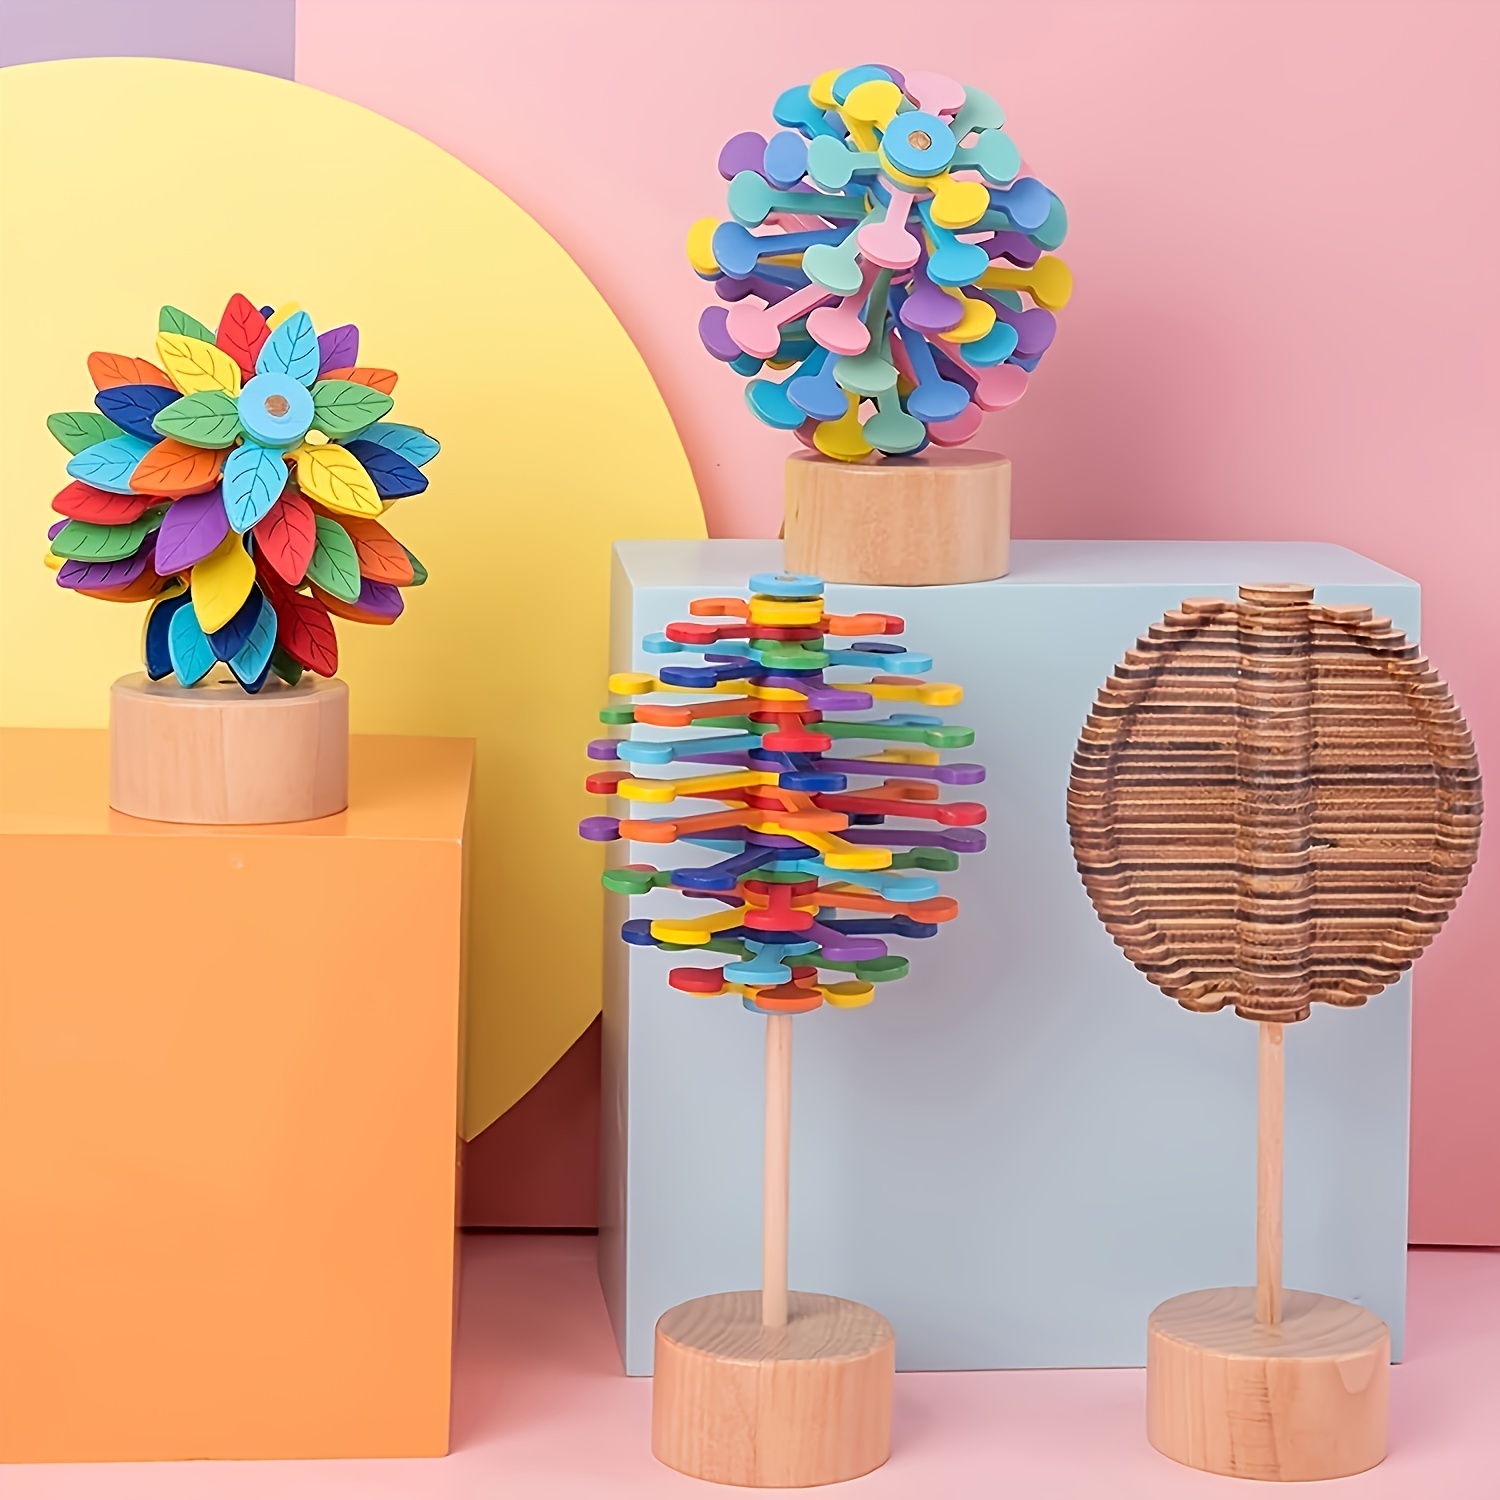 Wooden Lollipop Stress Relief Toy Magic Spinning Toy Decompression Toys Multicolor Wood Spinning Wands Spiral Lollipop Sensory Toys Home Decor Stress Relief Toys For Adults And Kids